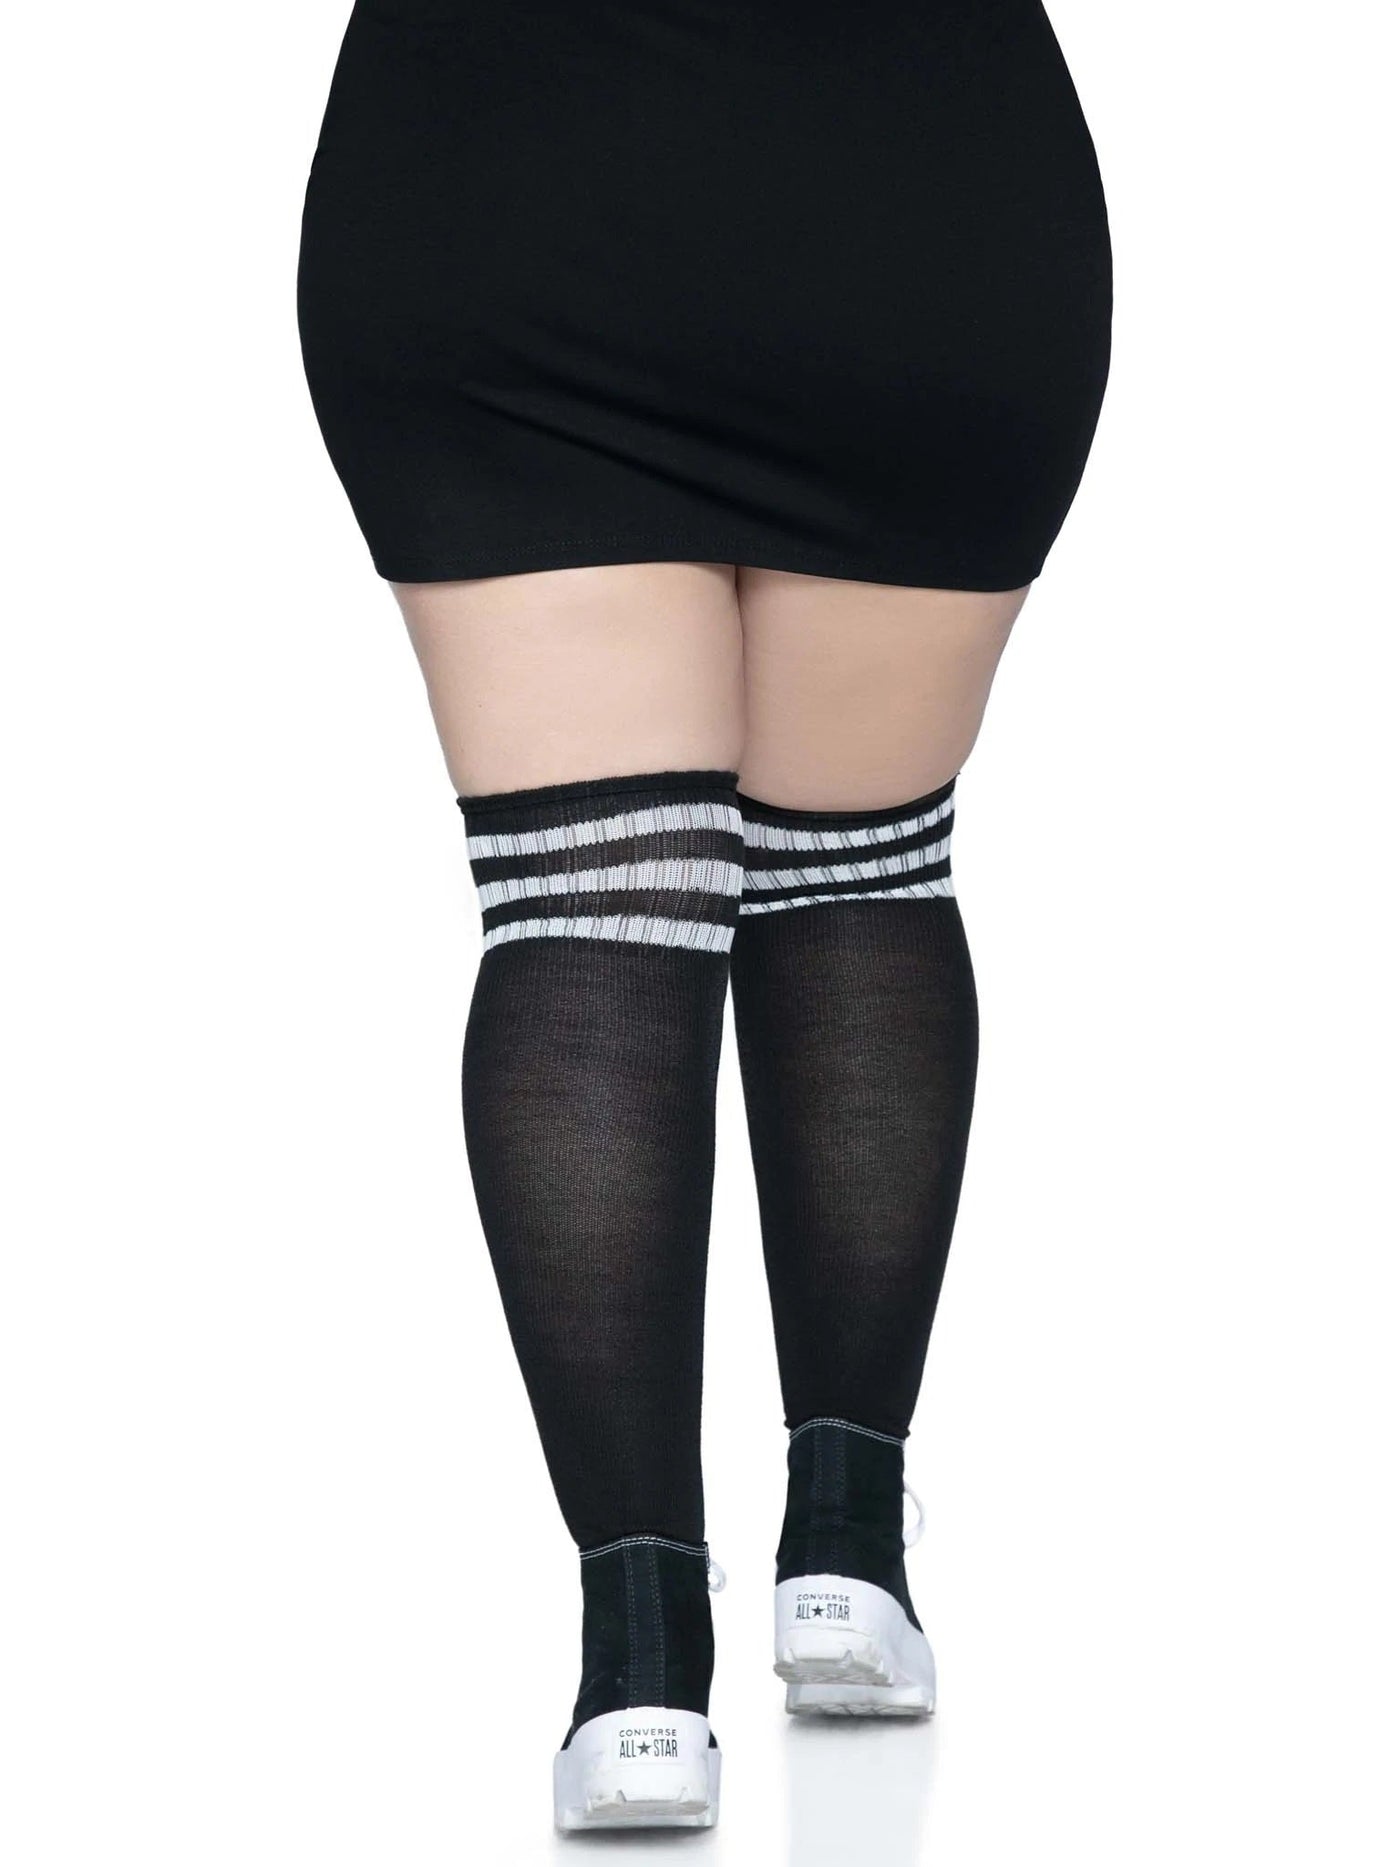 Over The Knee Athletic Socks Curvy Size